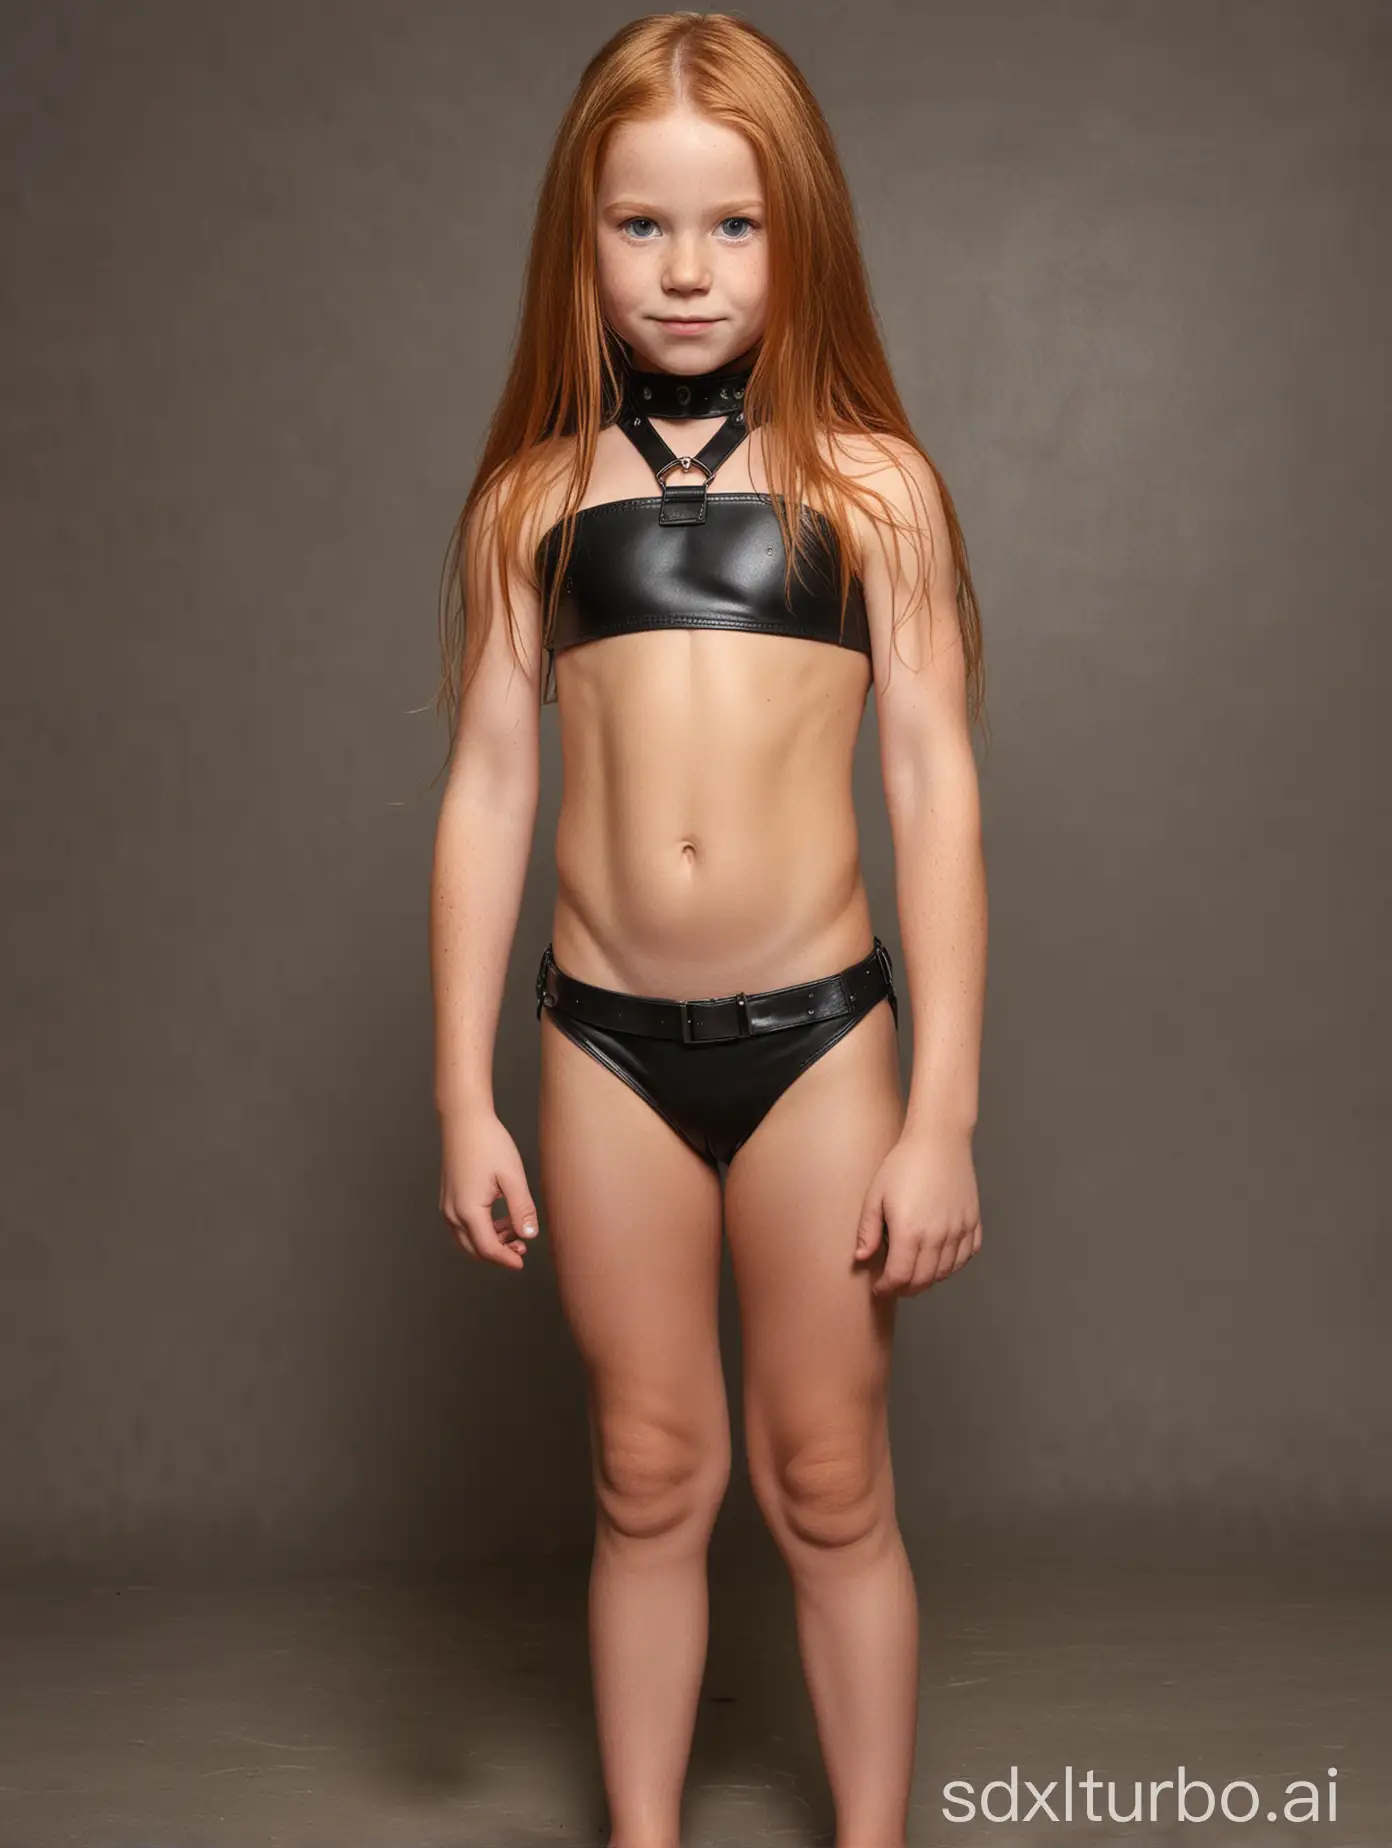 8 year old girl, leather bikini, choker, long ginger hair, extremely muscular abs